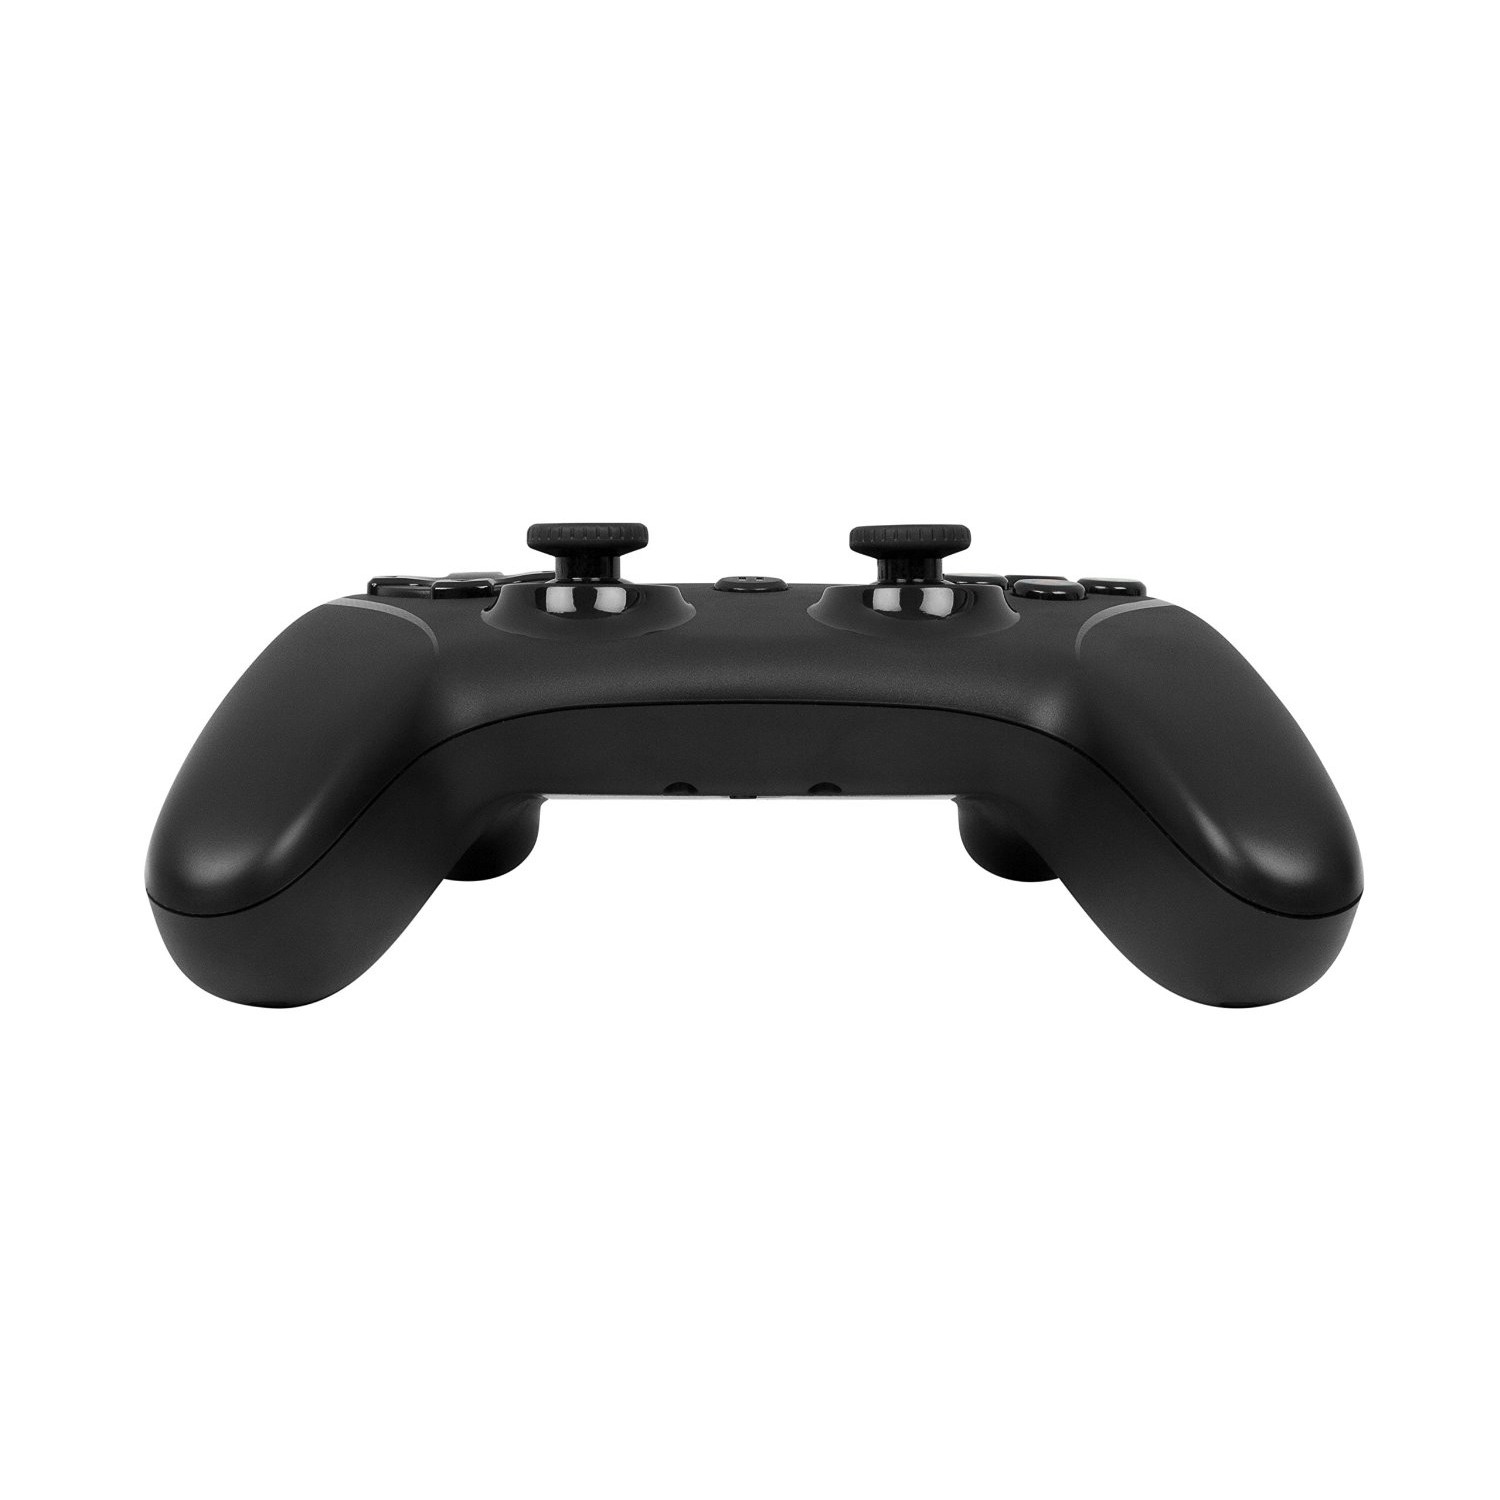 Steelseries Stratus Xl for ios-4